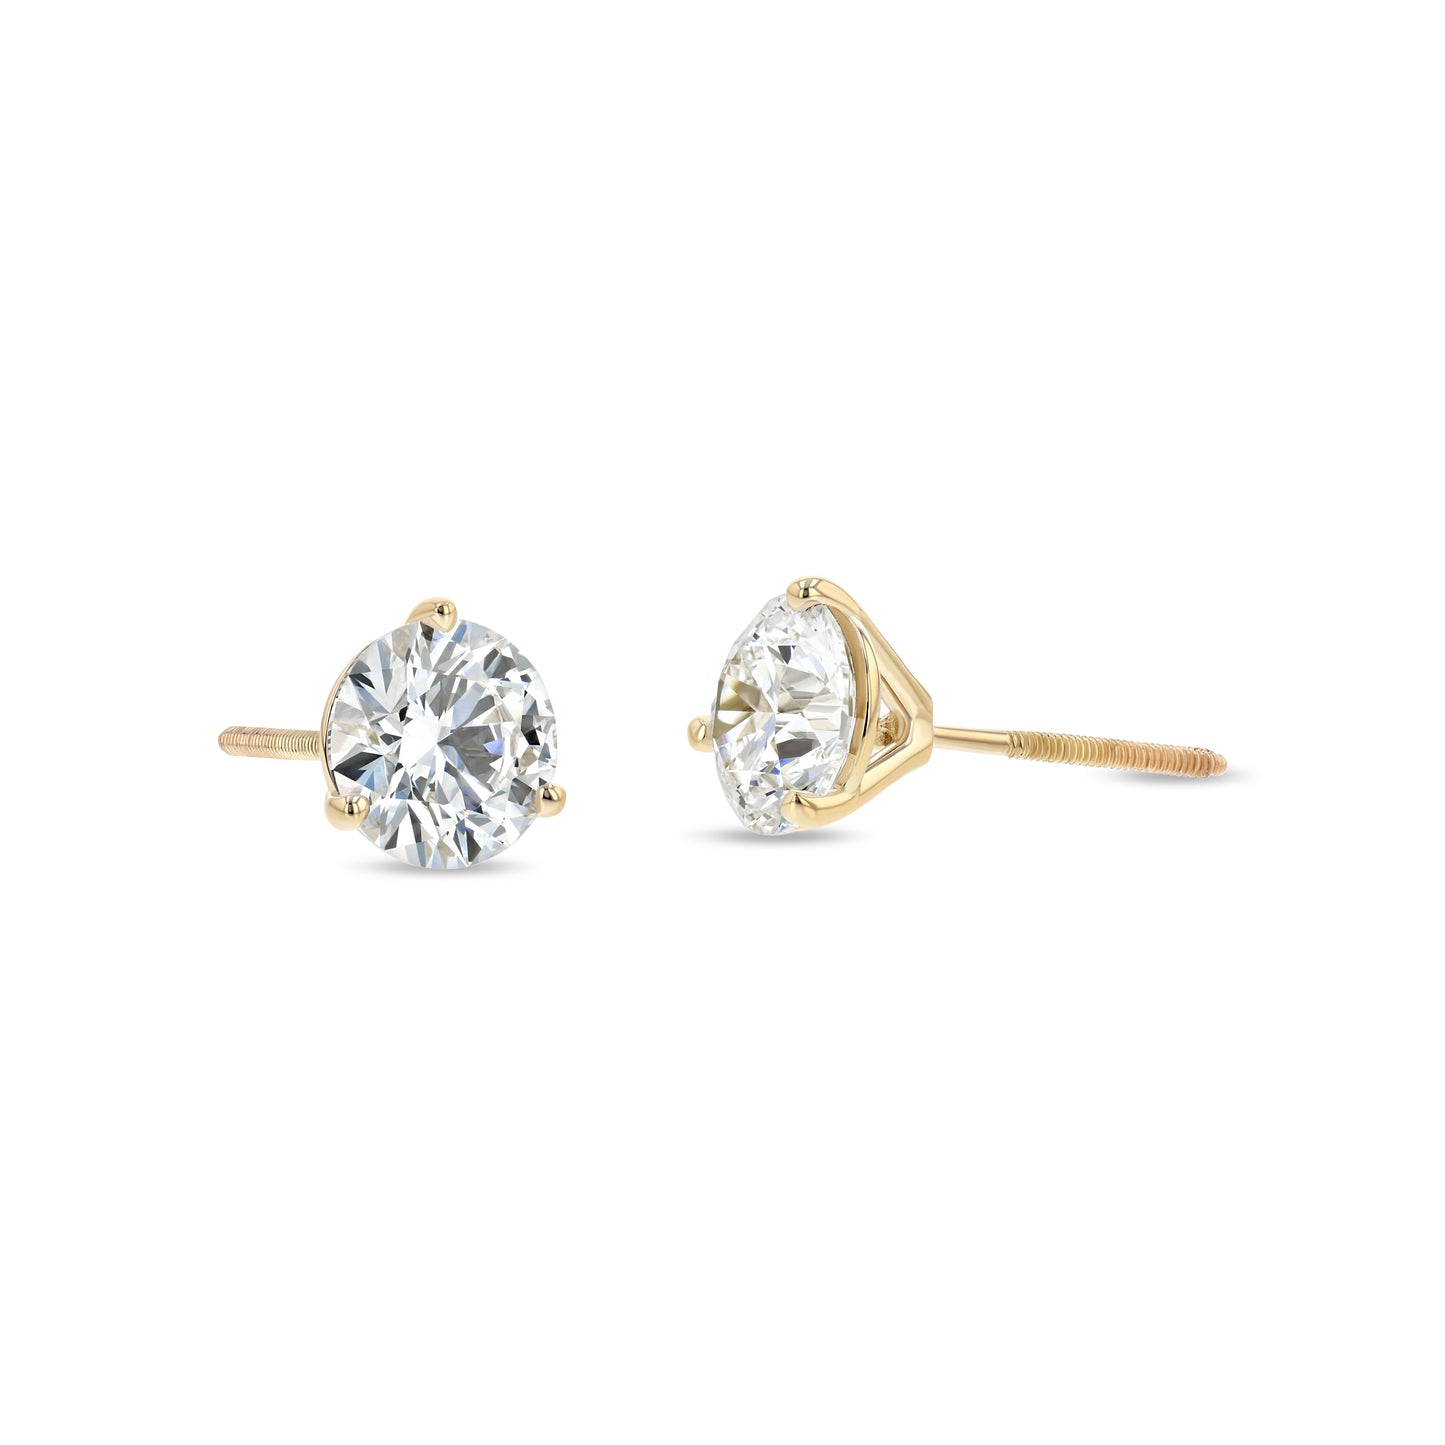 14k Yellow Gold 3-prong Martini Round Diamond Stud Earrings 1ctw (5.0mm Ea), H Color, Si3-i1 Clarity